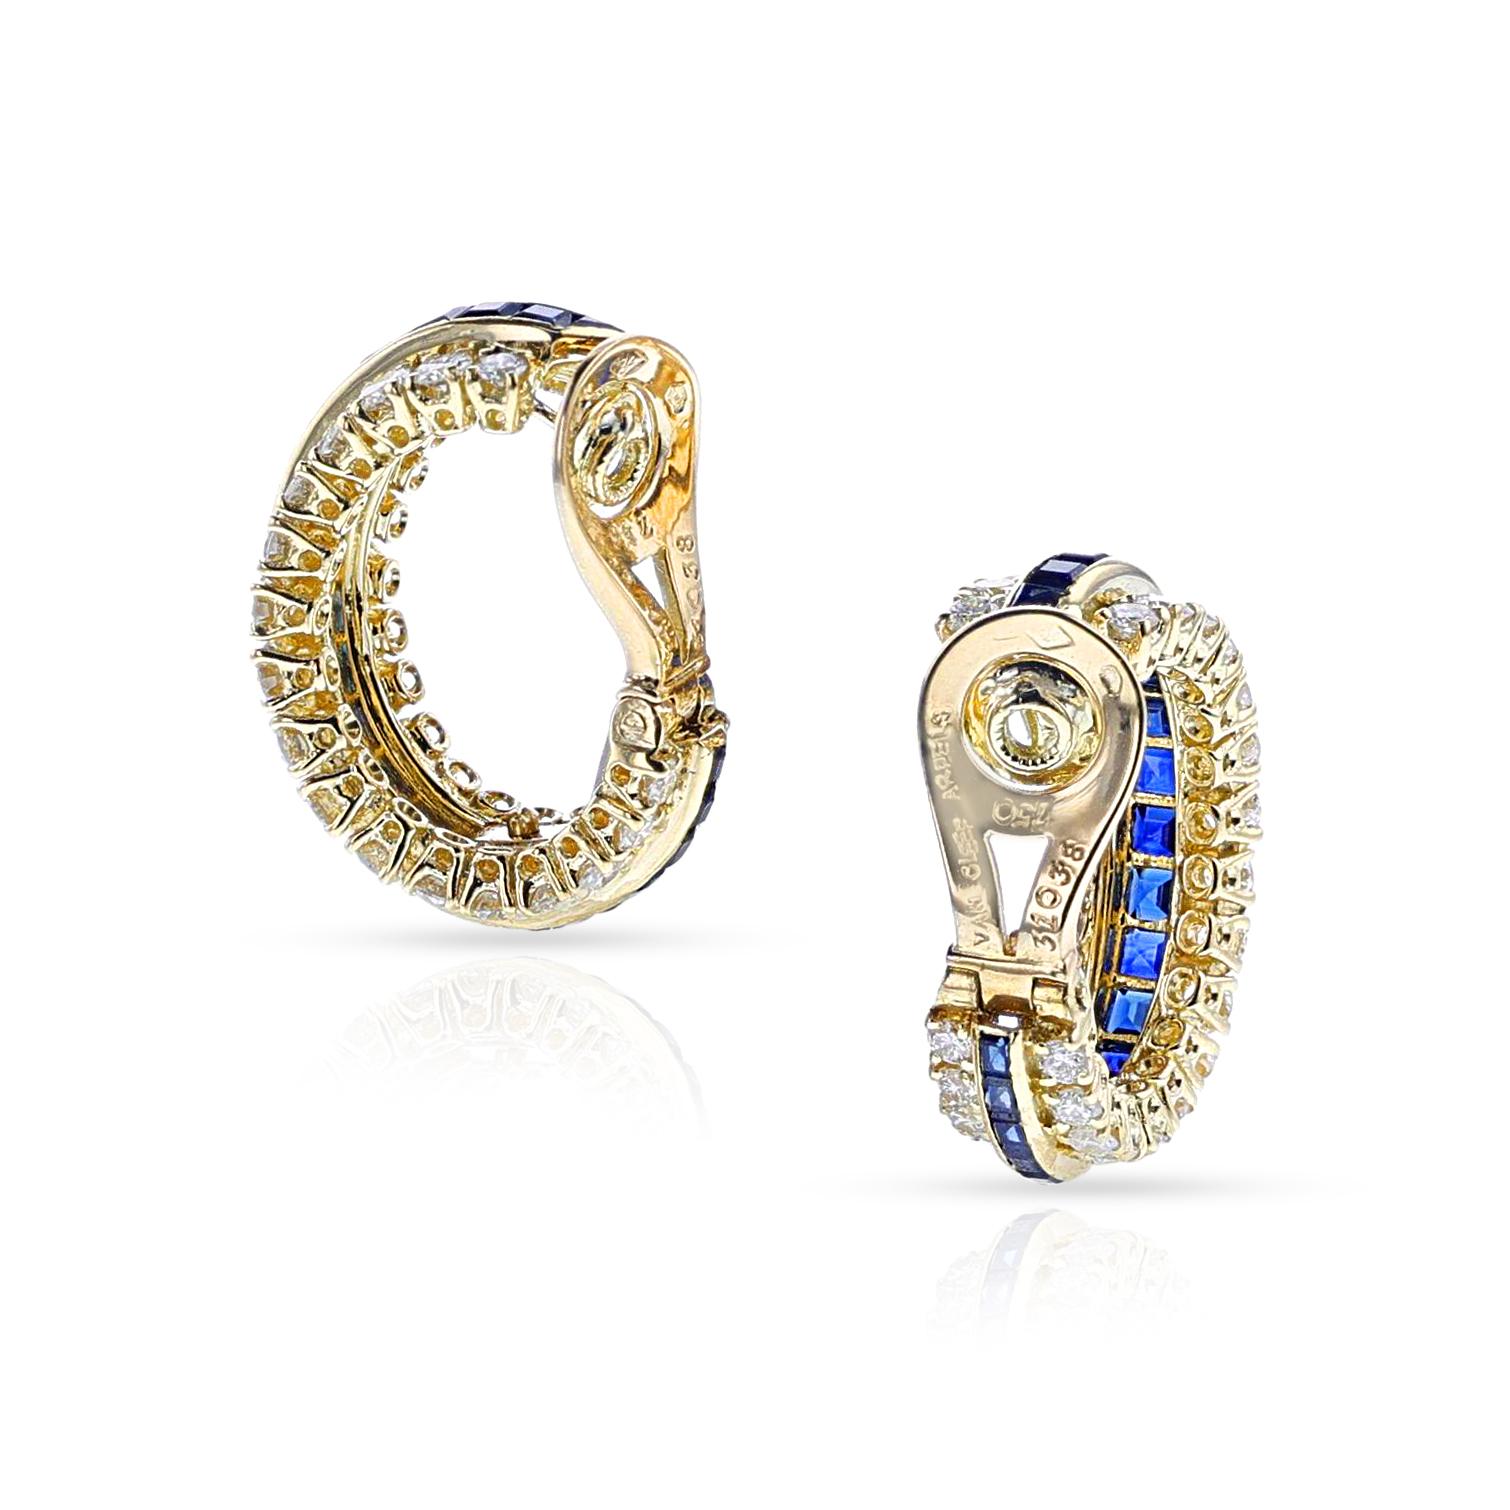 Van Cleef & Arpels Sapphire and Diamond Half Hoop Earrings, 18k In Excellent Condition For Sale In New York, NY